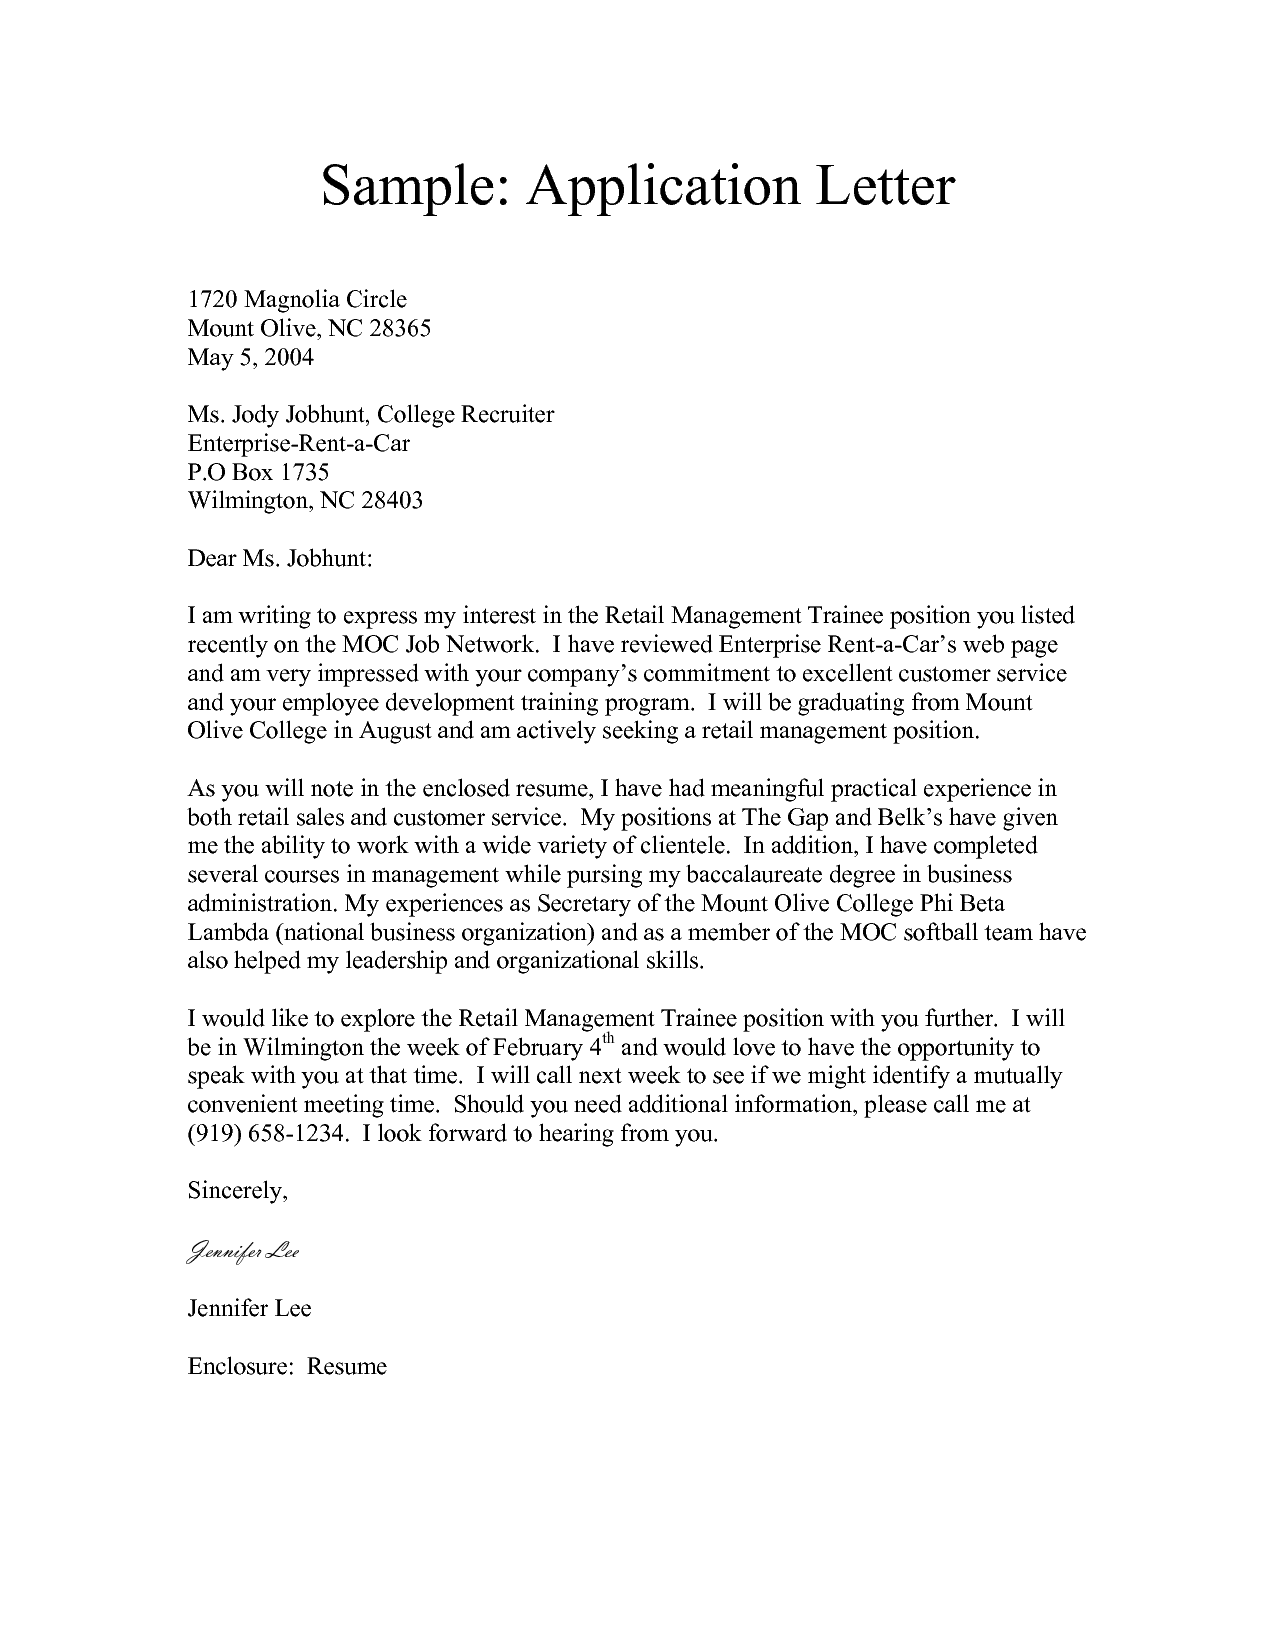 example of application letter pdf download